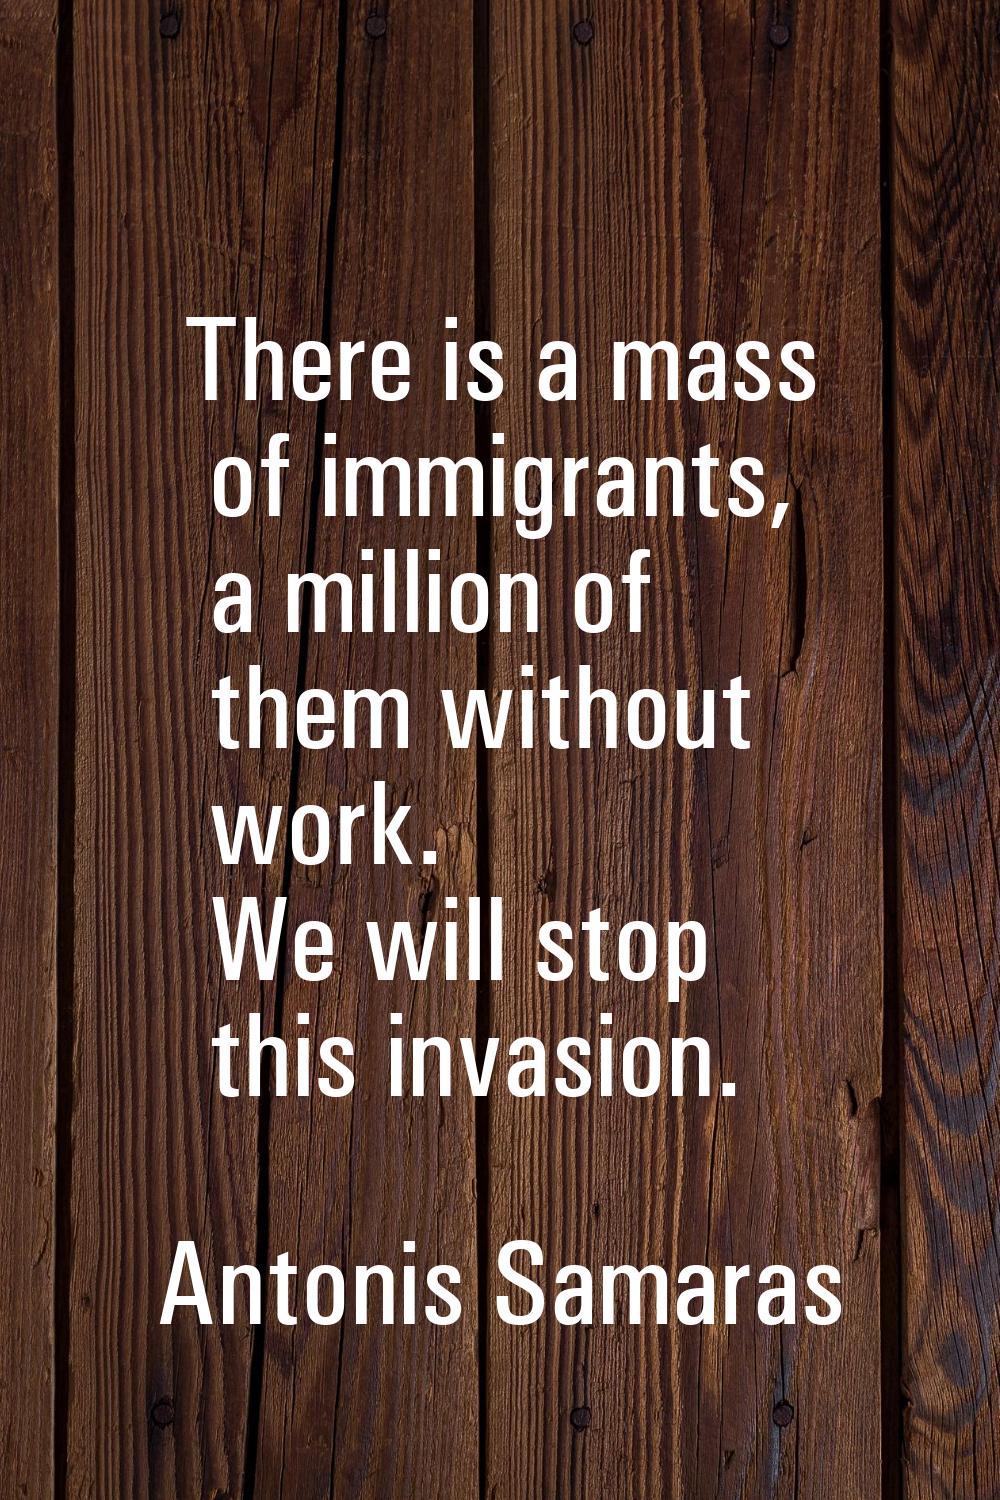 There is a mass of immigrants, a million of them without work. We will stop this invasion.